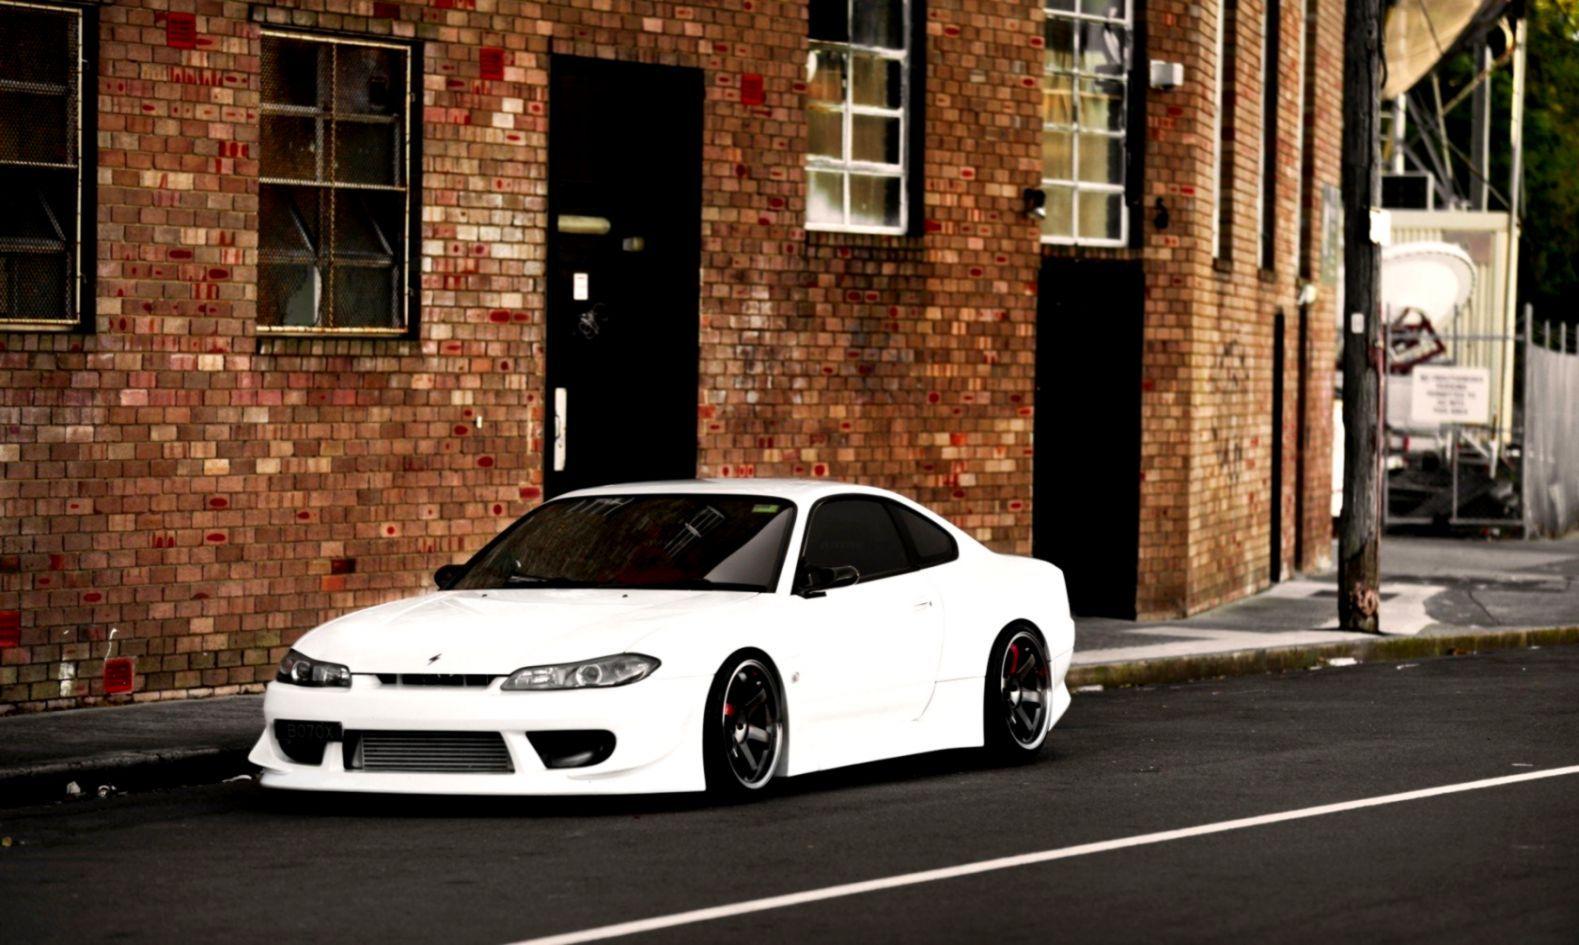 Silvia S15 Wallpapers Top Free Silvia S15 Backgrounds Wallpaperaccess